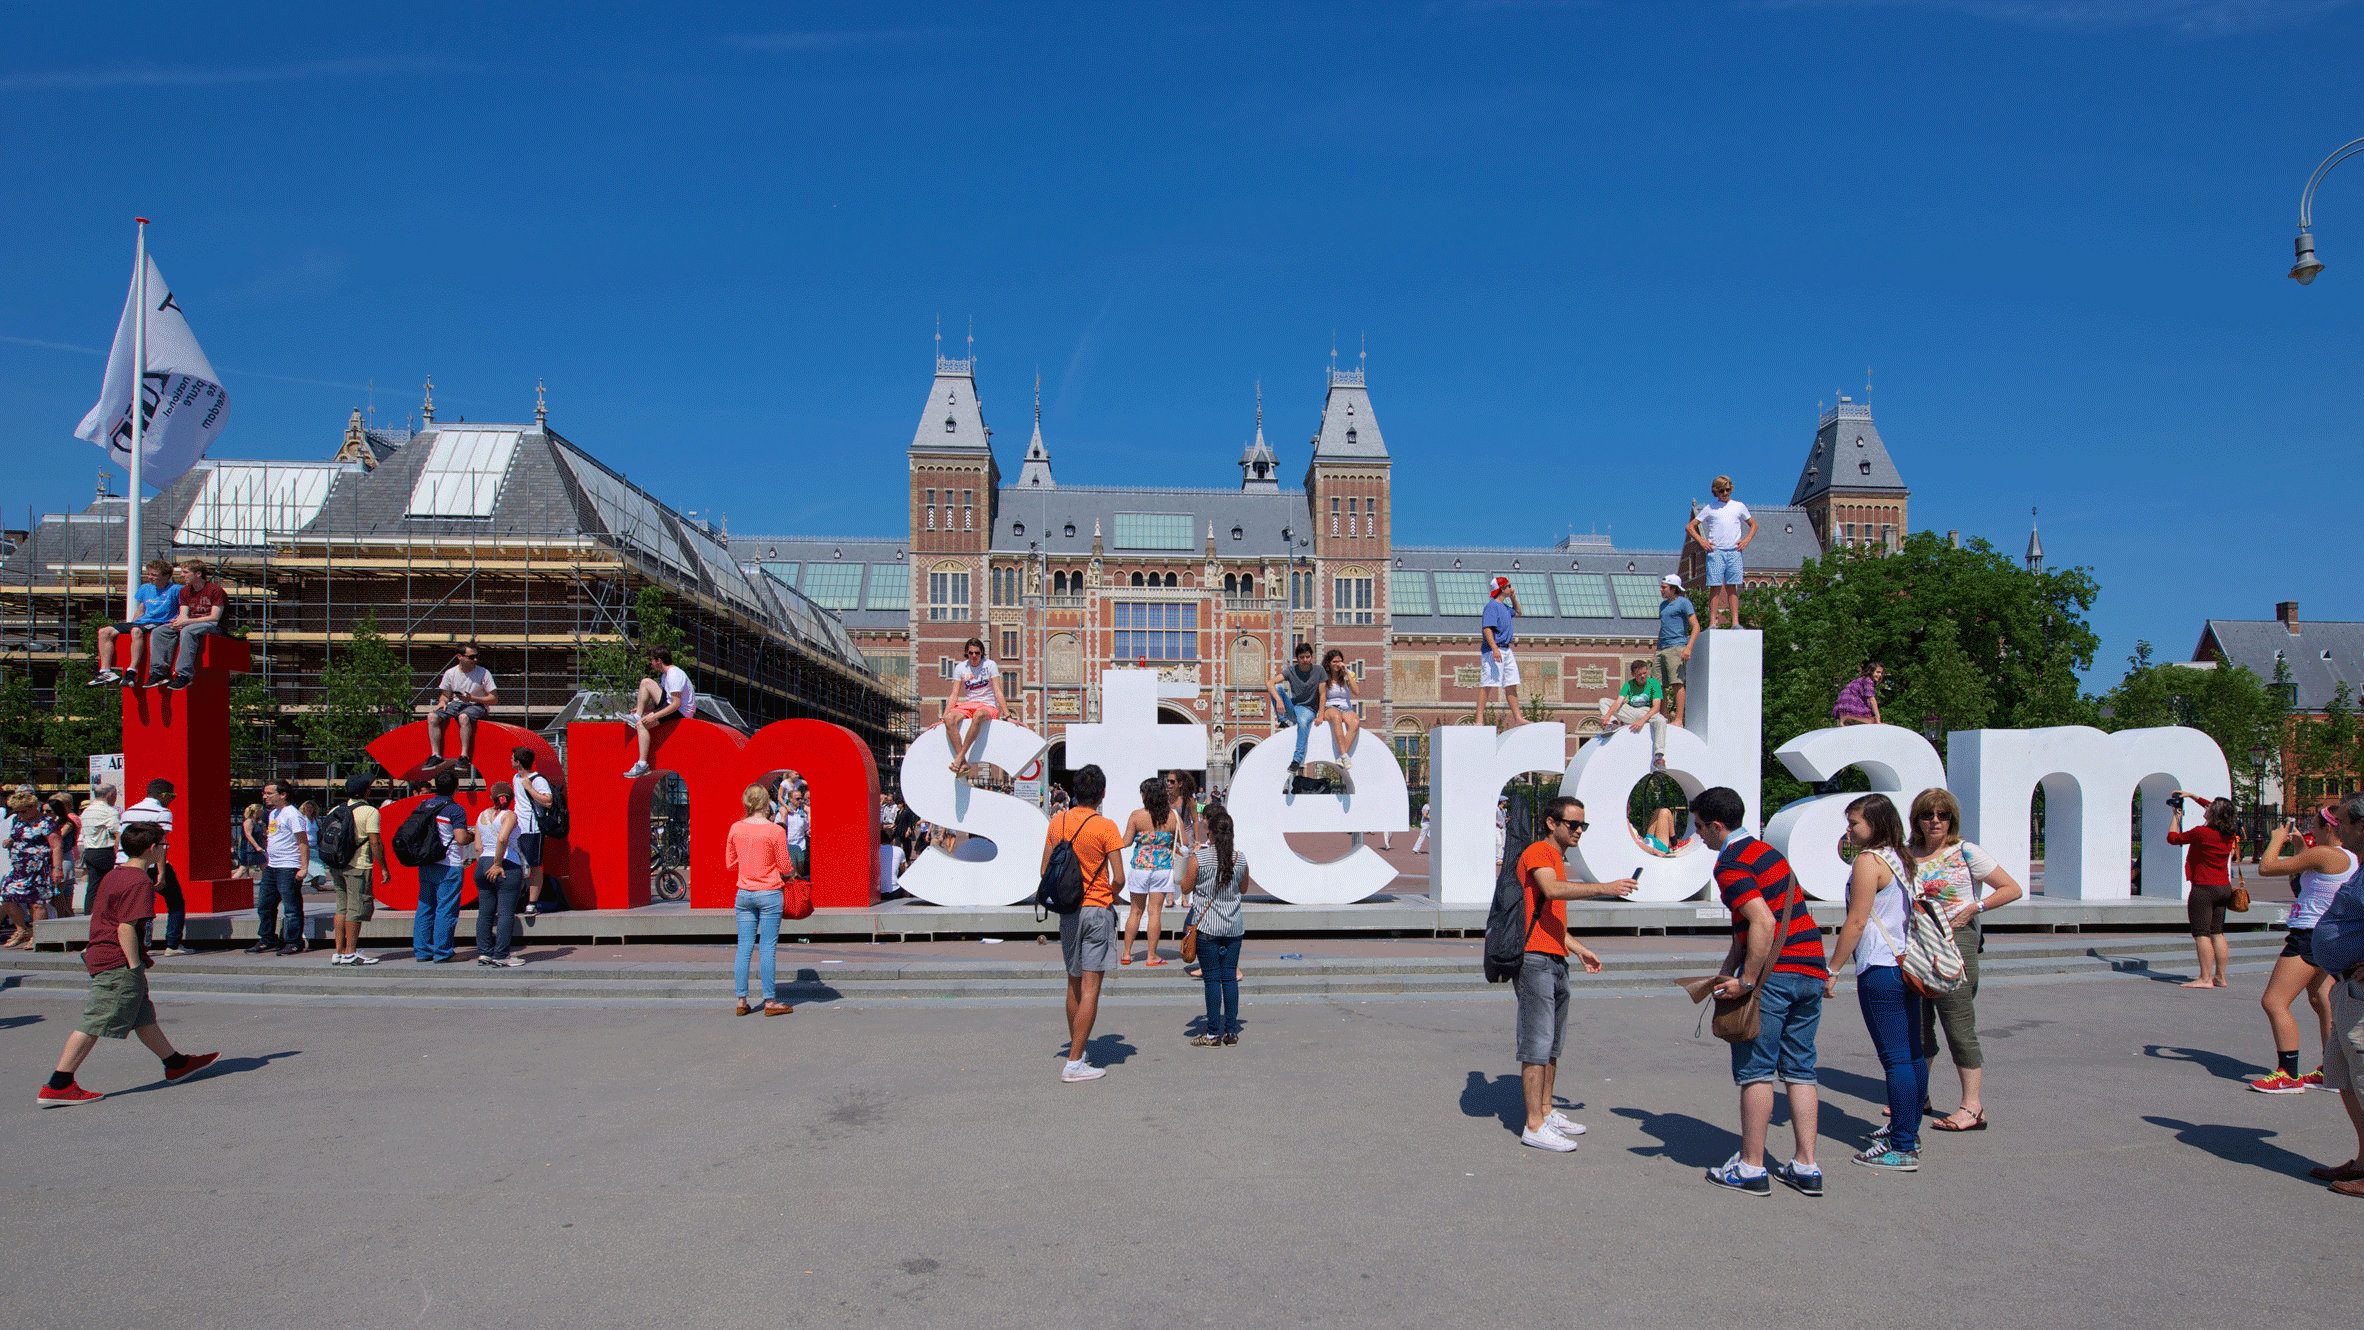 Council Removes I Amsterdam Sign After It Becomes Selfie Spot